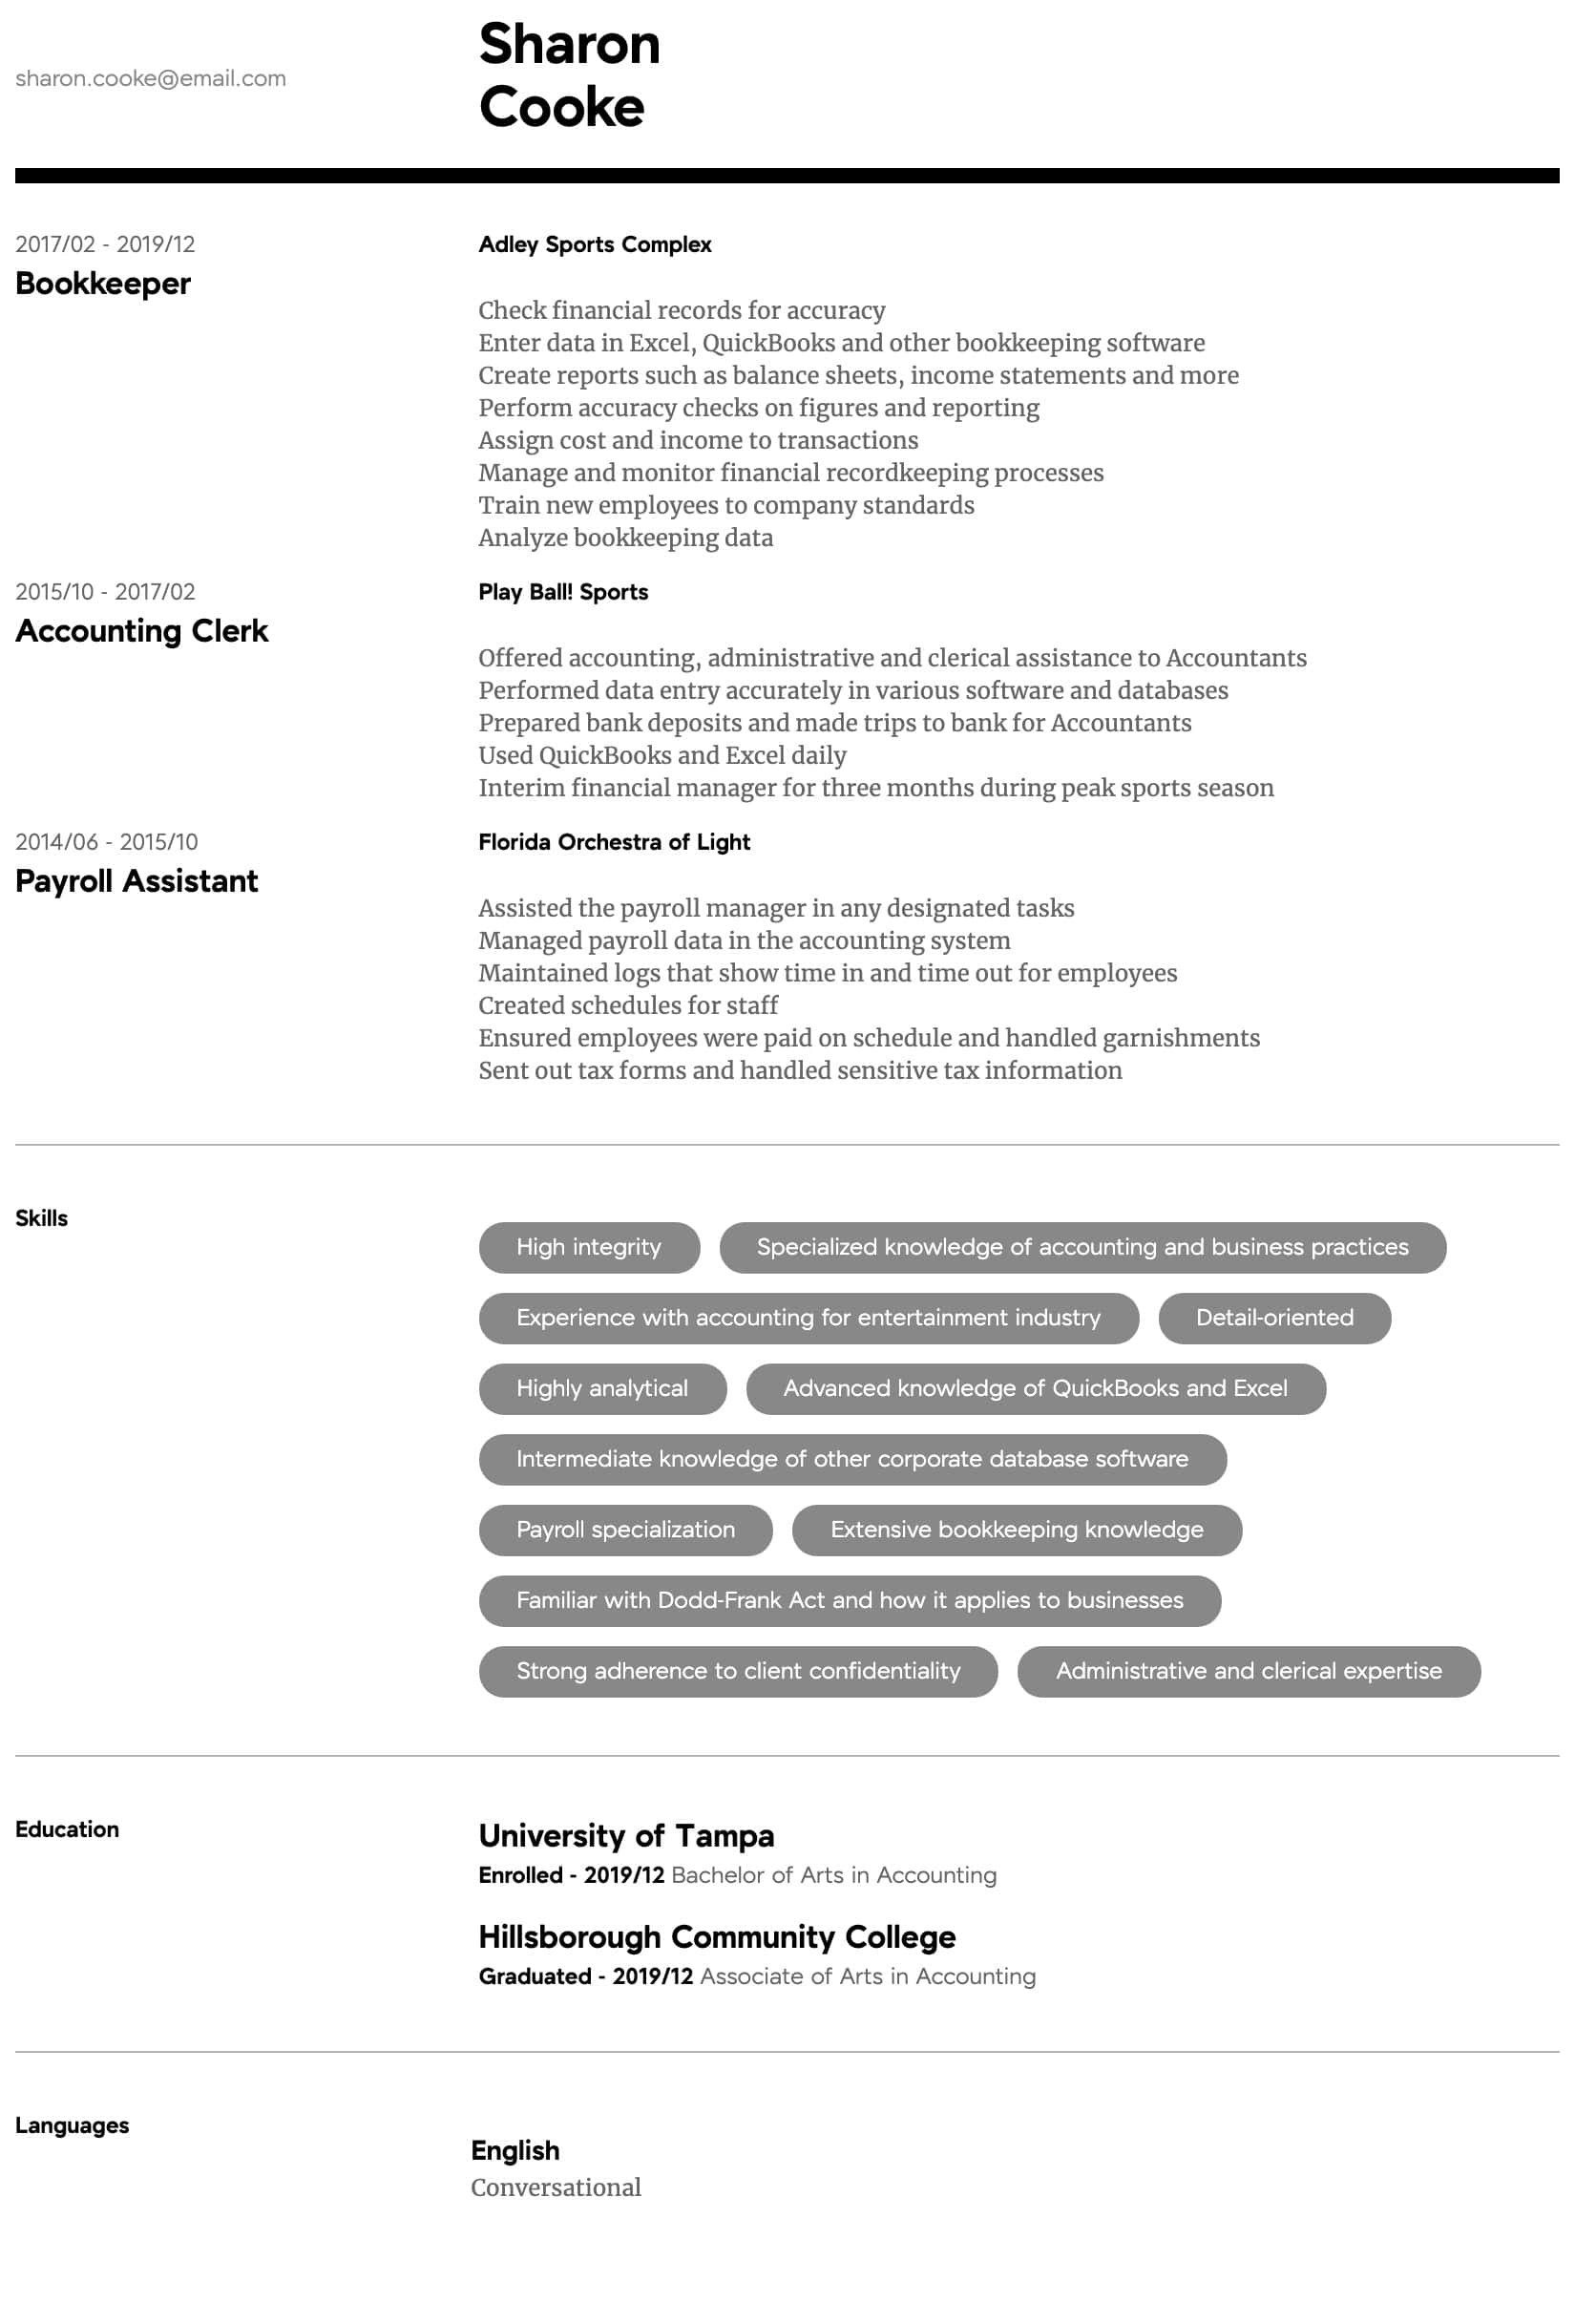 Entry Level Accounting Jobs Resume Sample Accountant Resume Samples All Experience Levels Resume.com …